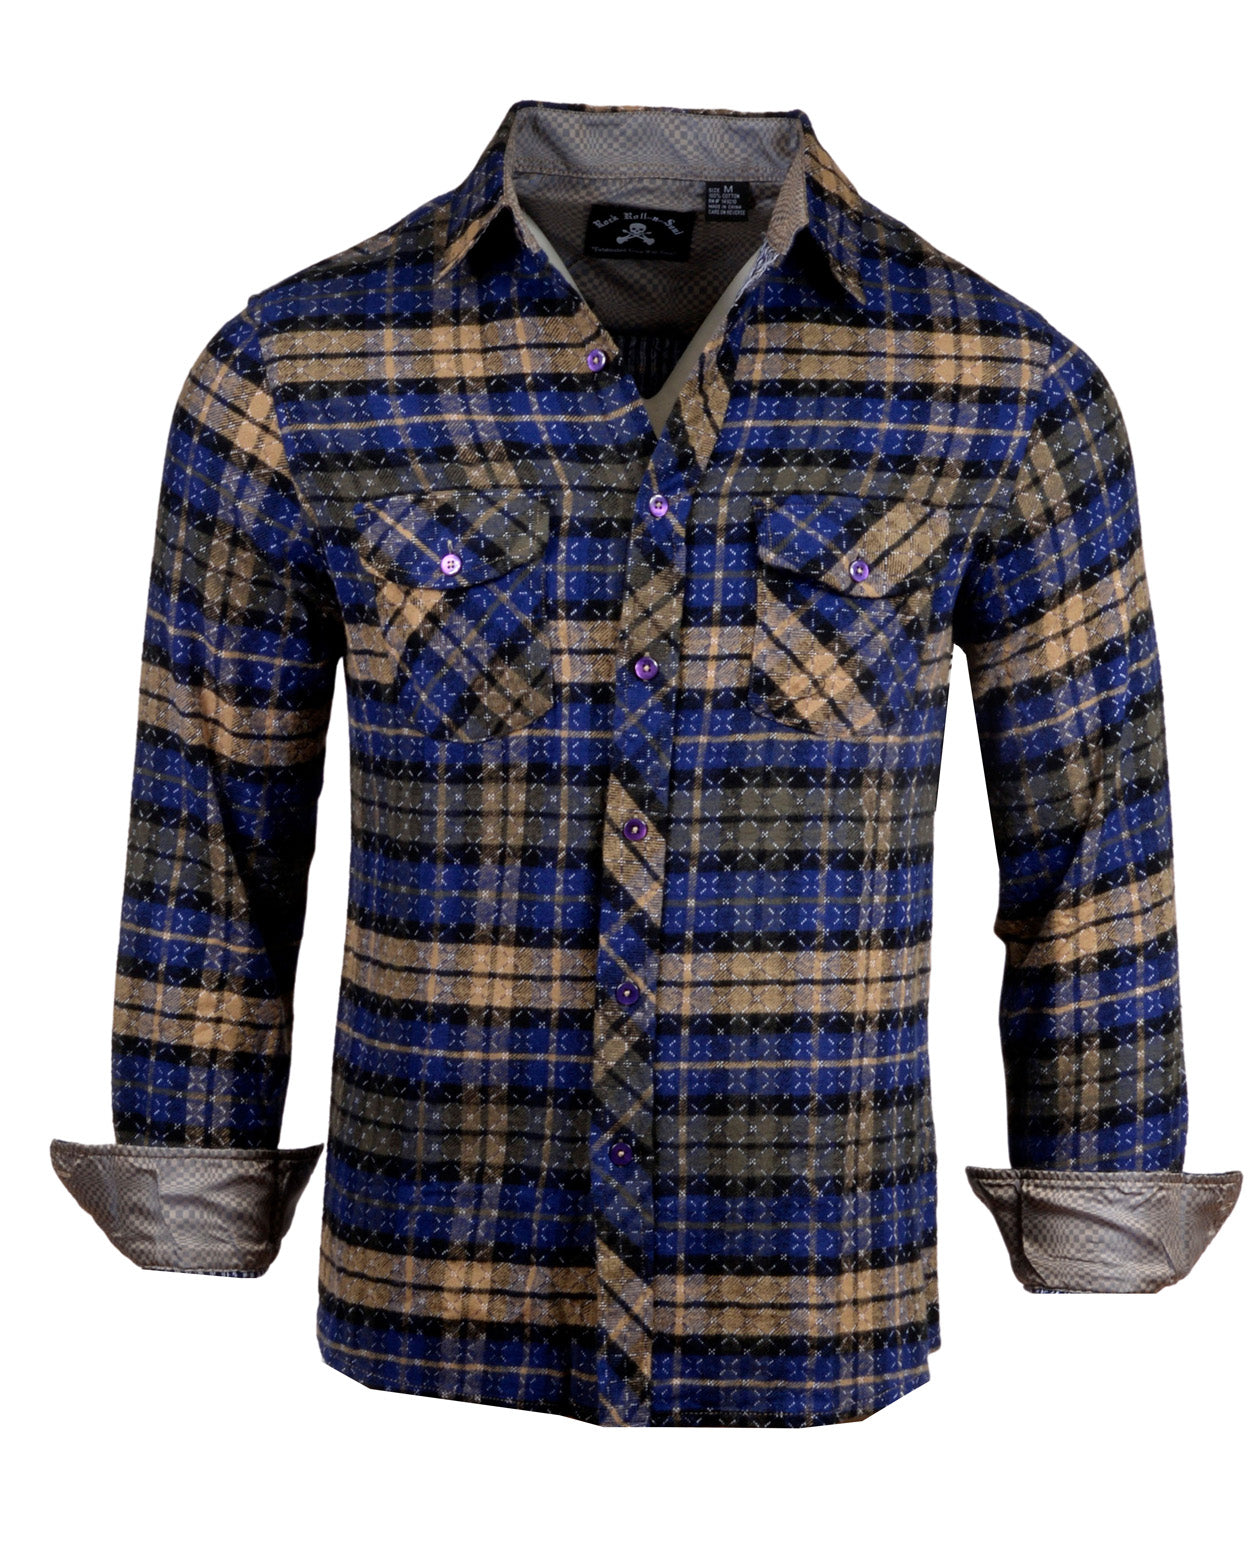 Men's Casual Flannel Fashion Button Up Shirt - Get Rhythm in Navy  by Rock Roll n Soul1